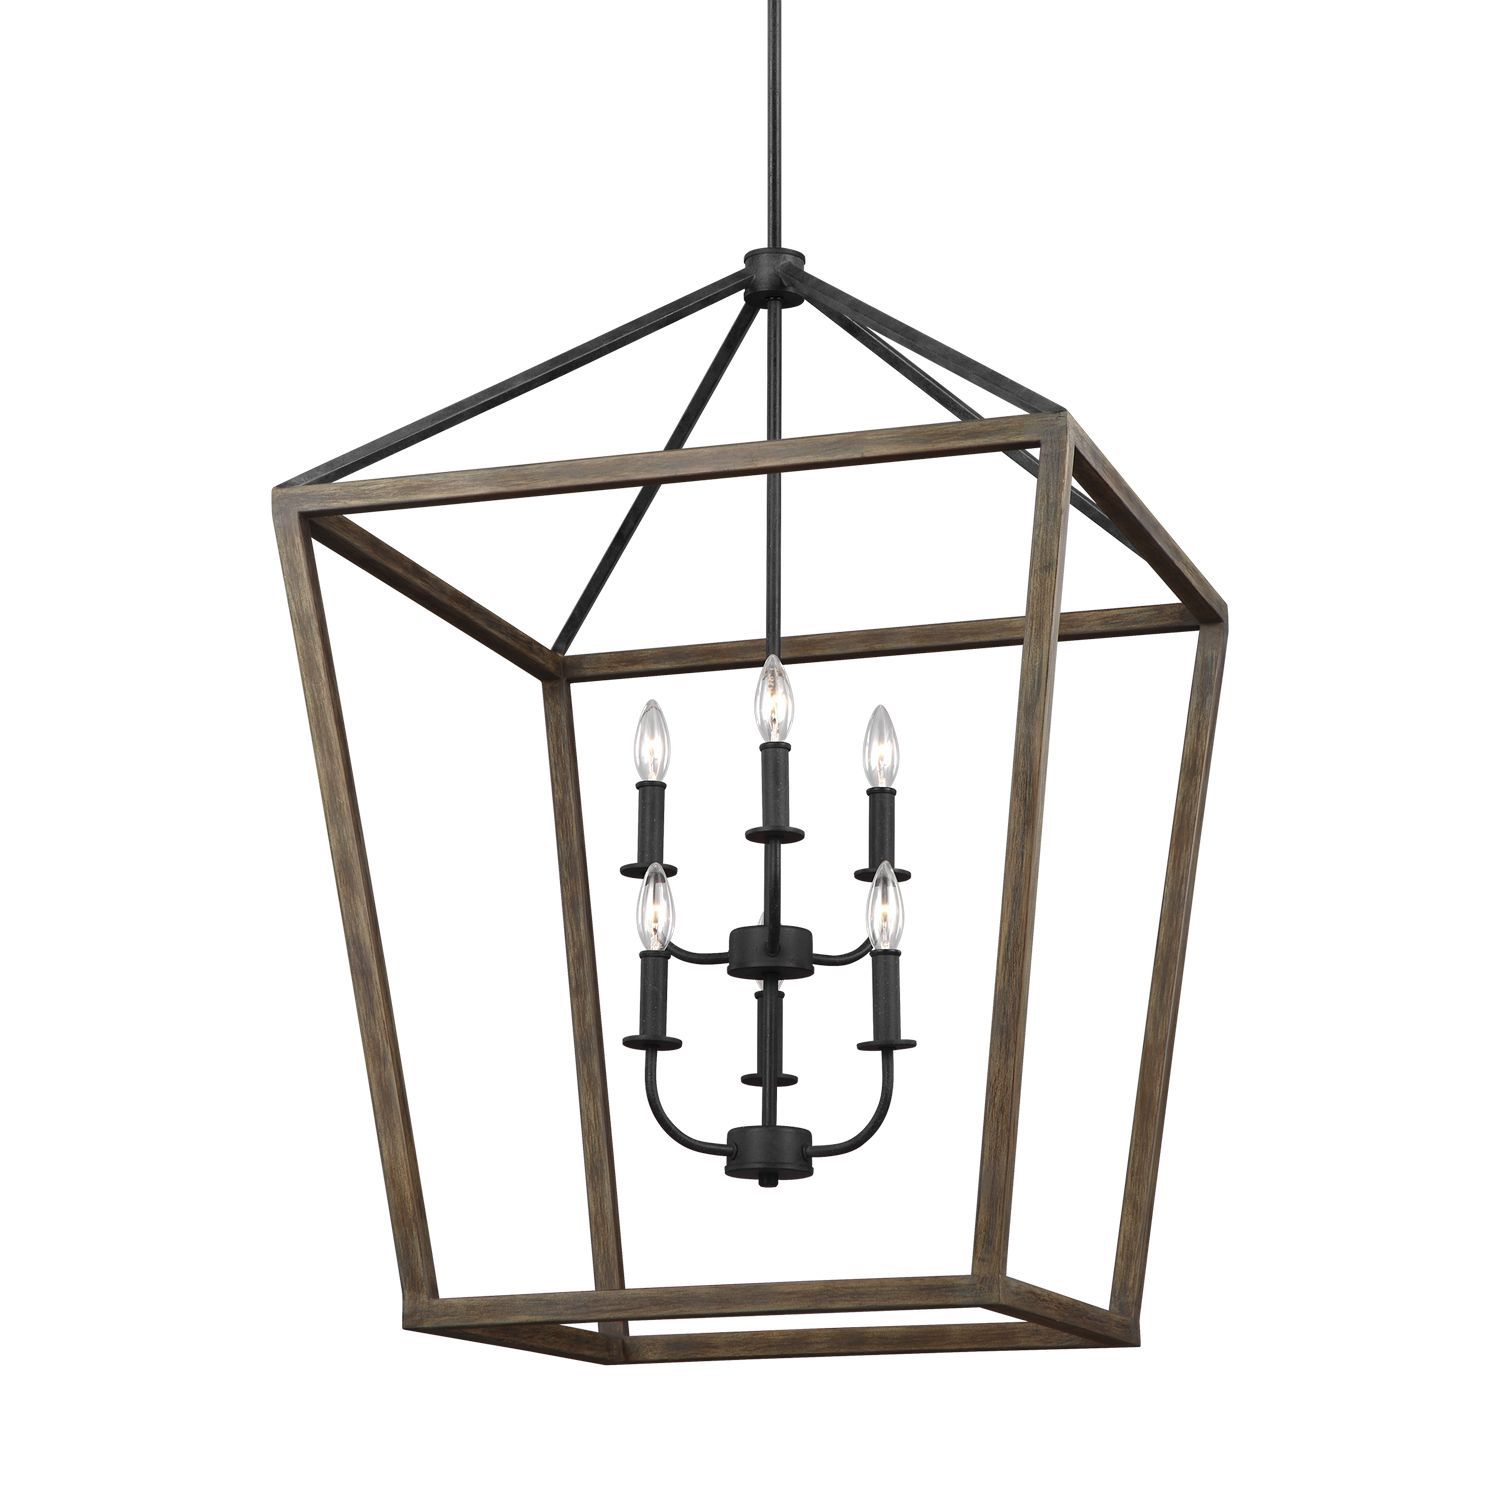 Transitional Six Light Chandelier In Weathered Oak Wood/antique Forged Iron  From The Feiss – Gannet Collection… | Candle Chandelier, Large Lanterns, Lantern  Pendant With Weathered Oak Wood Lantern Chandeliers (View 8 of 15)